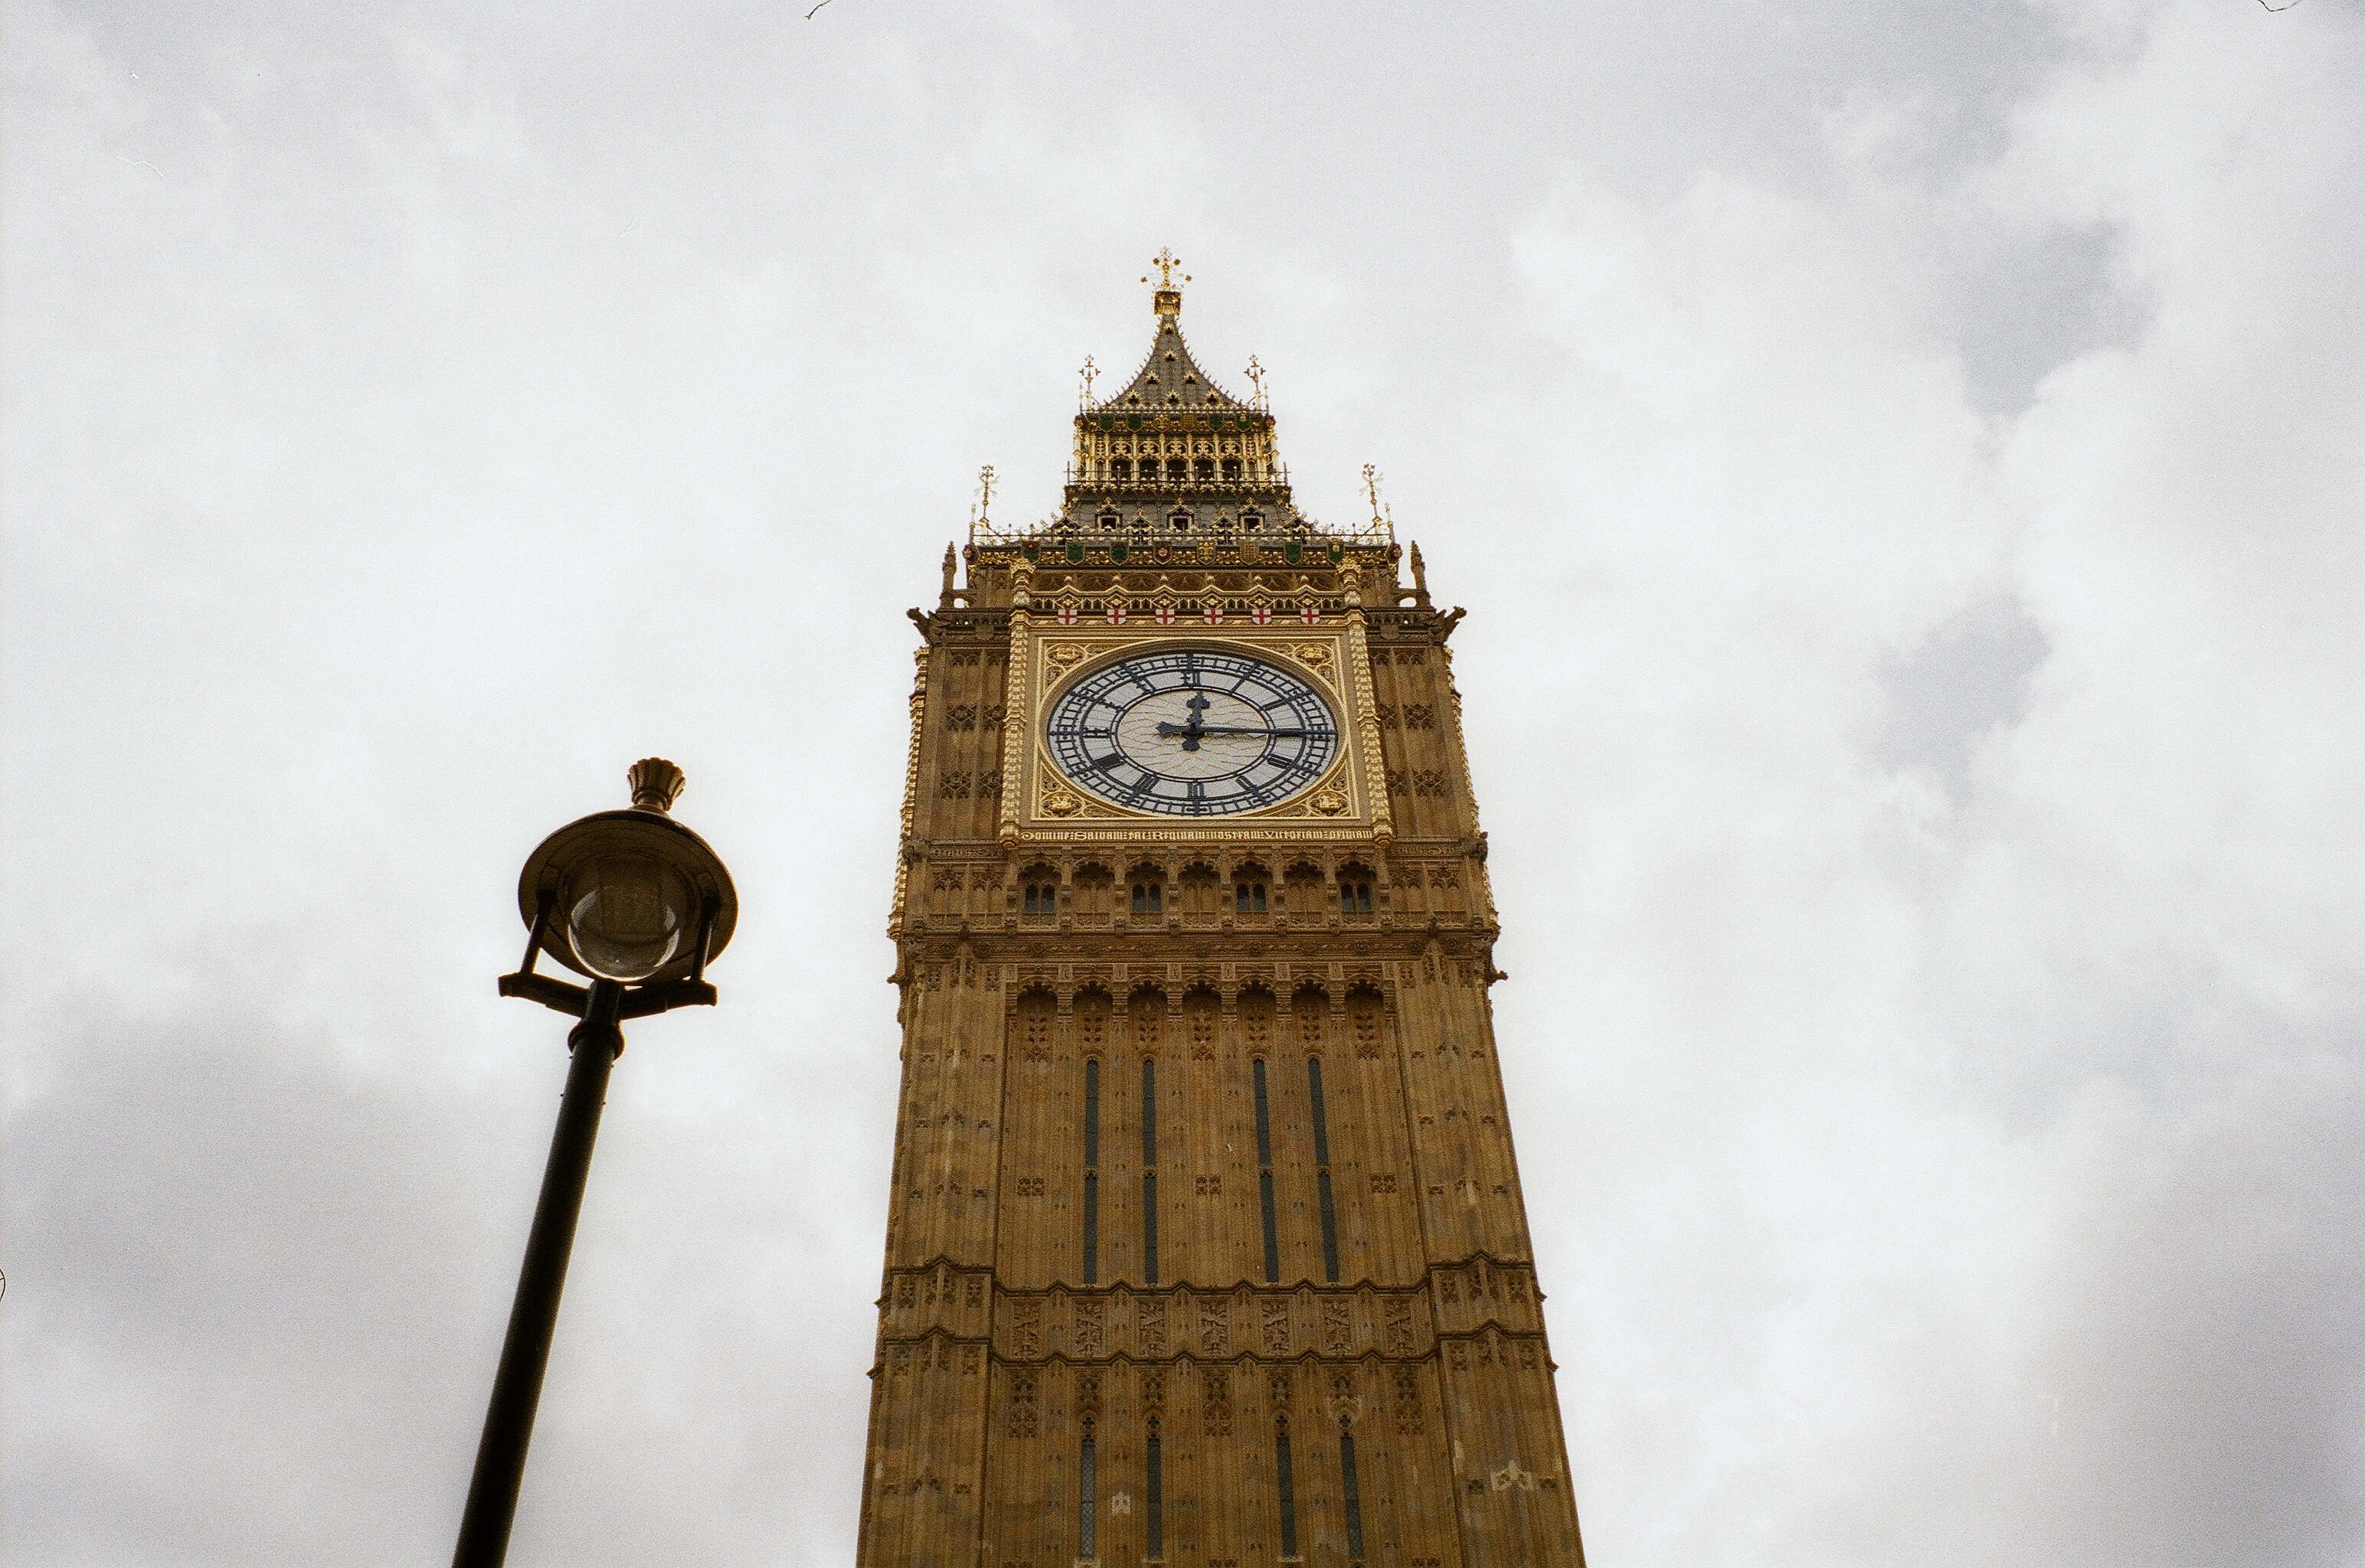 A beautiful up angle shot of the famous Big Ben bell tower in London, England